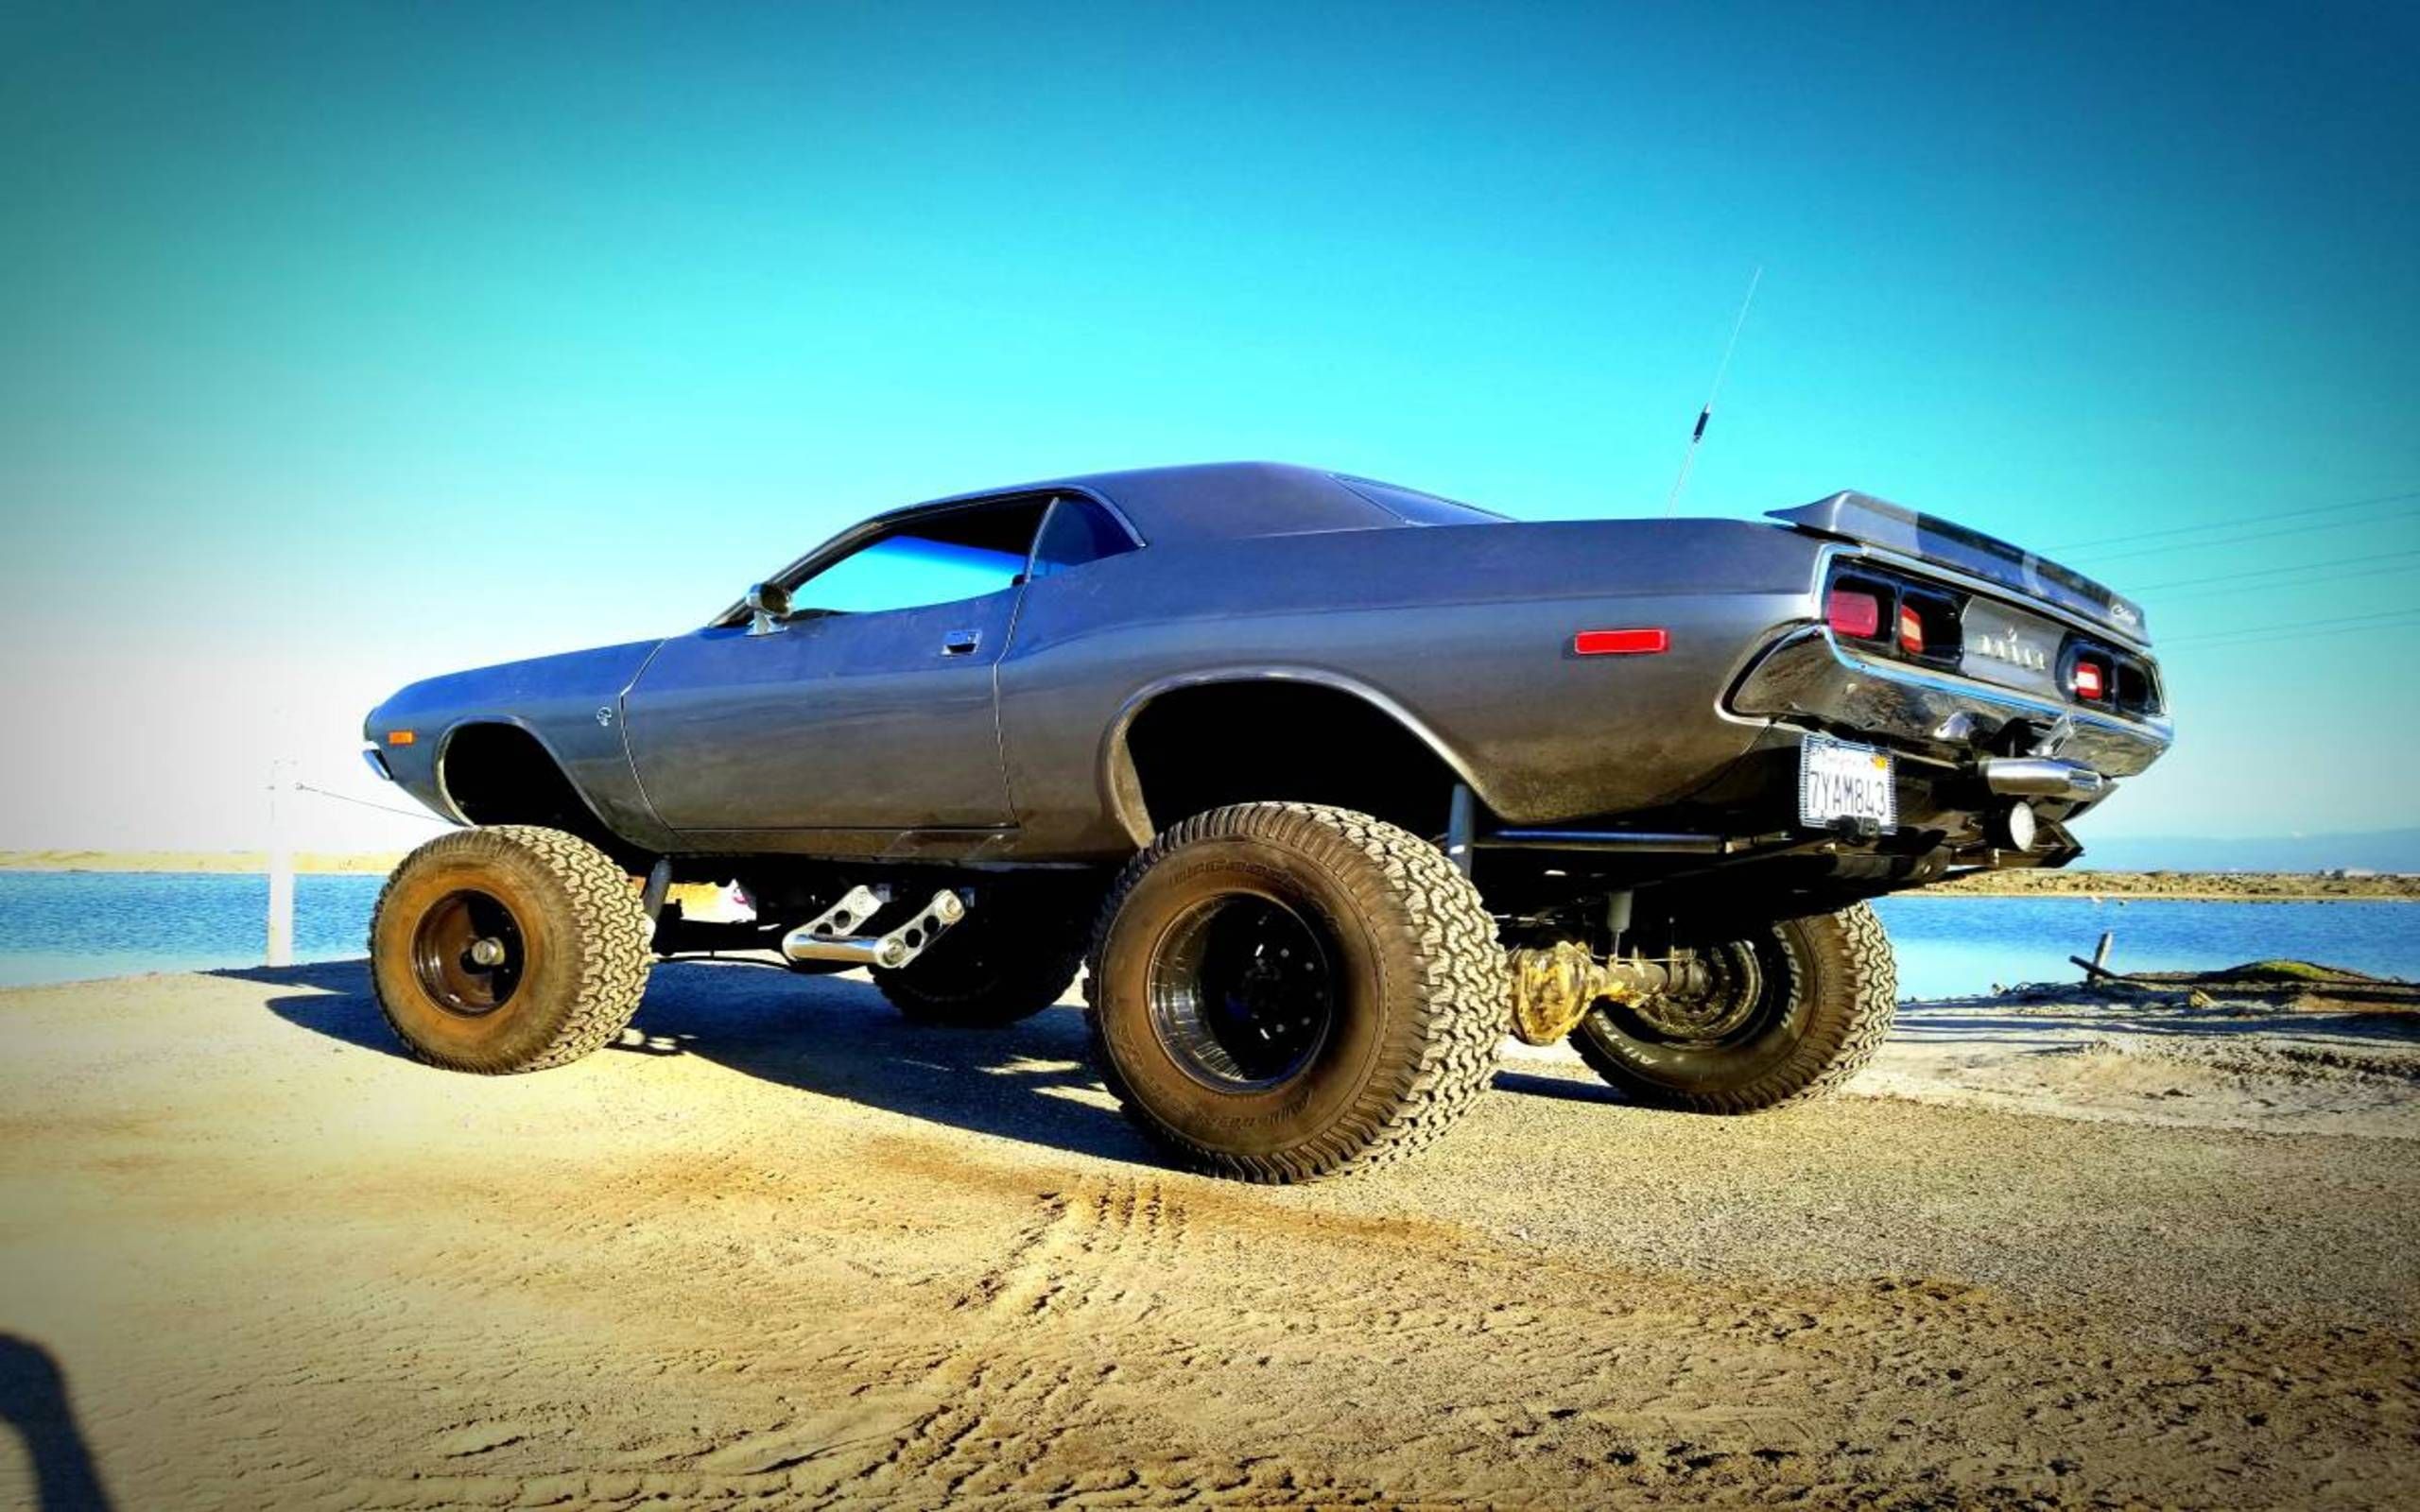 This Dodge Challenger puts your Jeep Wrangler to shame